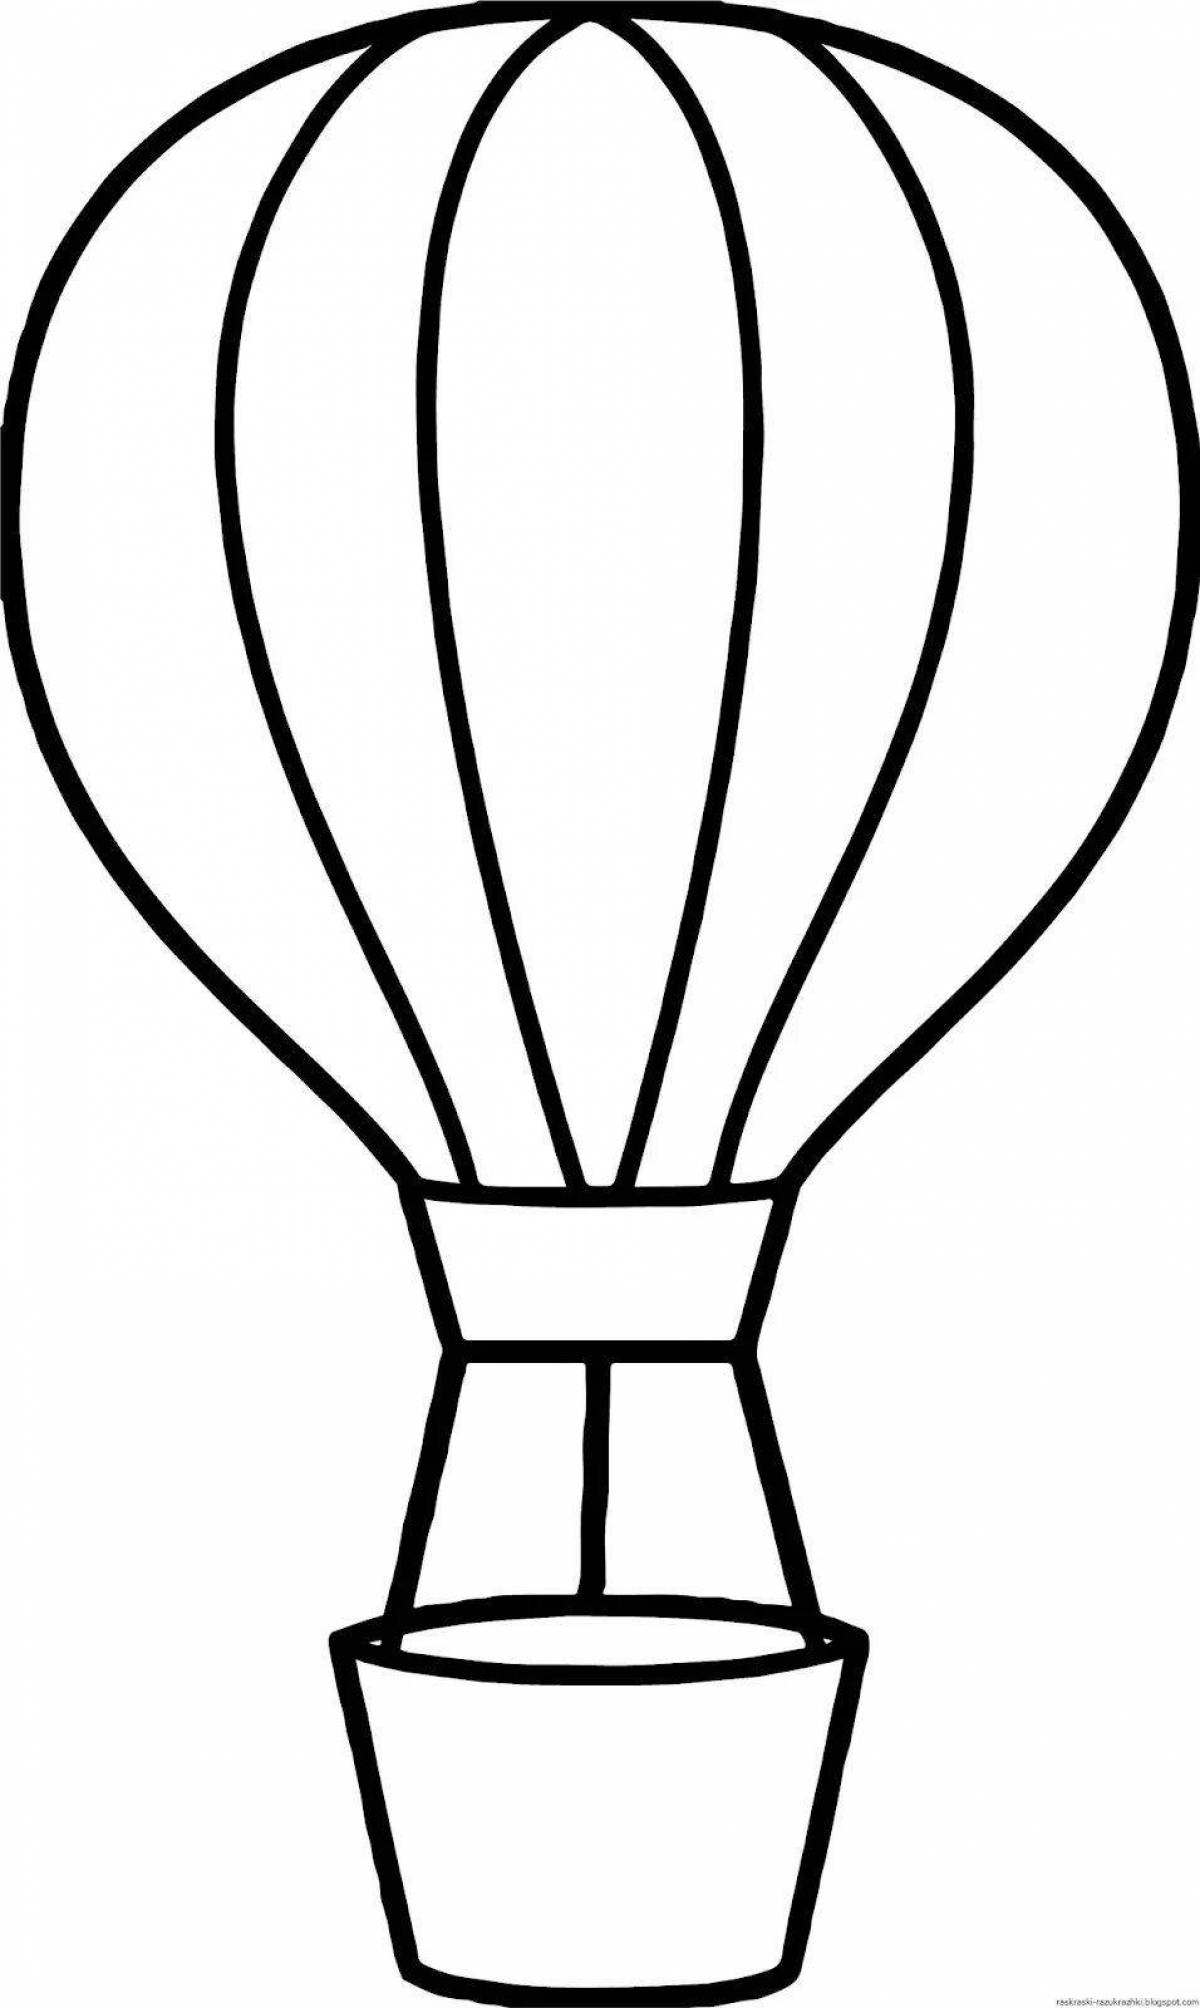 Bright balloon with a basket coloring for children